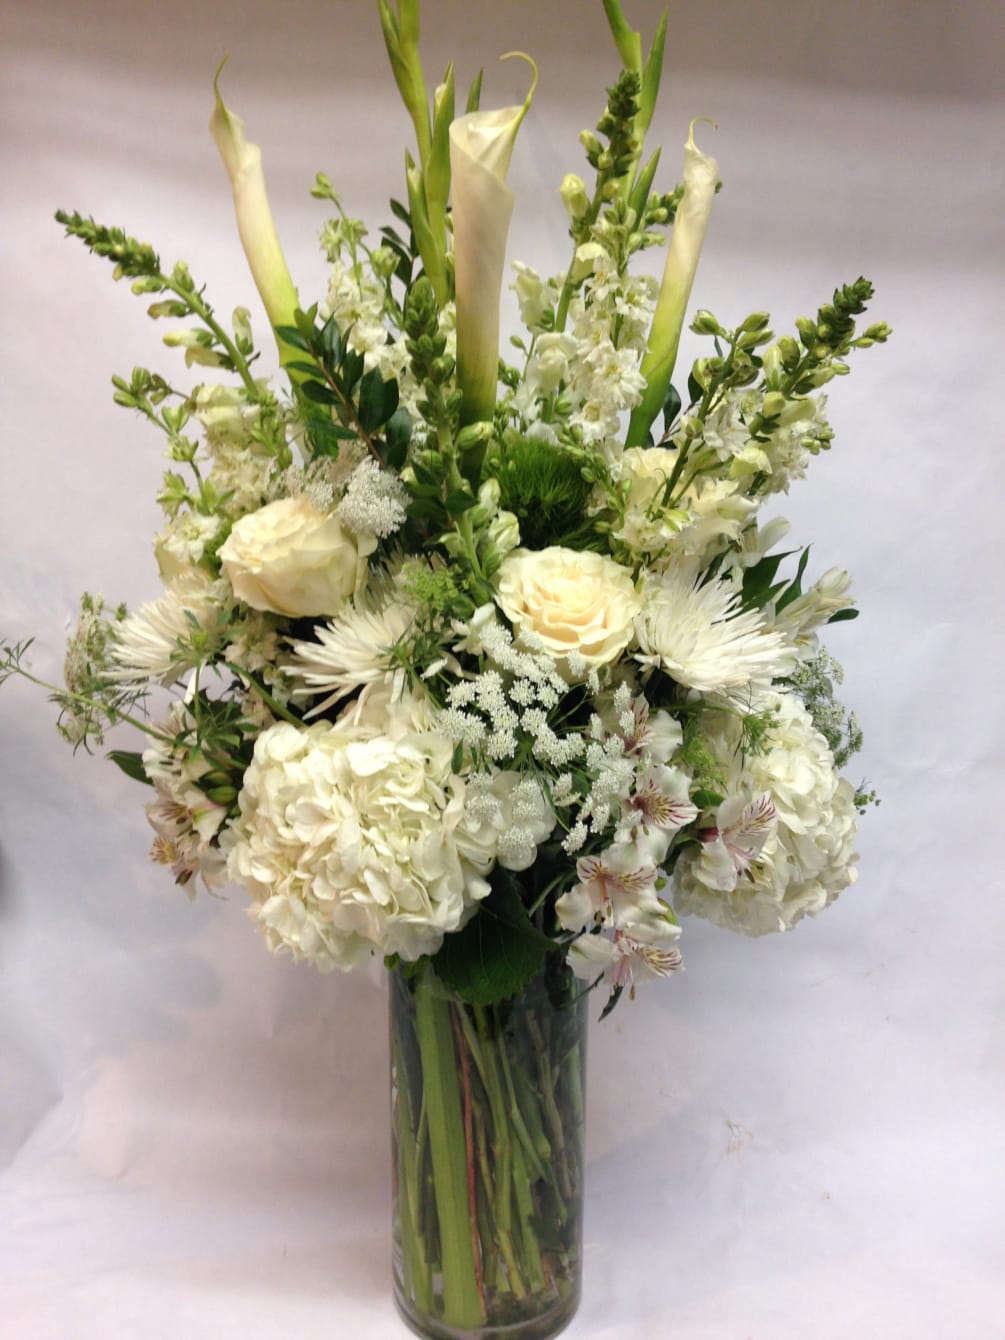 This arrangement contains a seasonal blend of white flowers including elegant calla